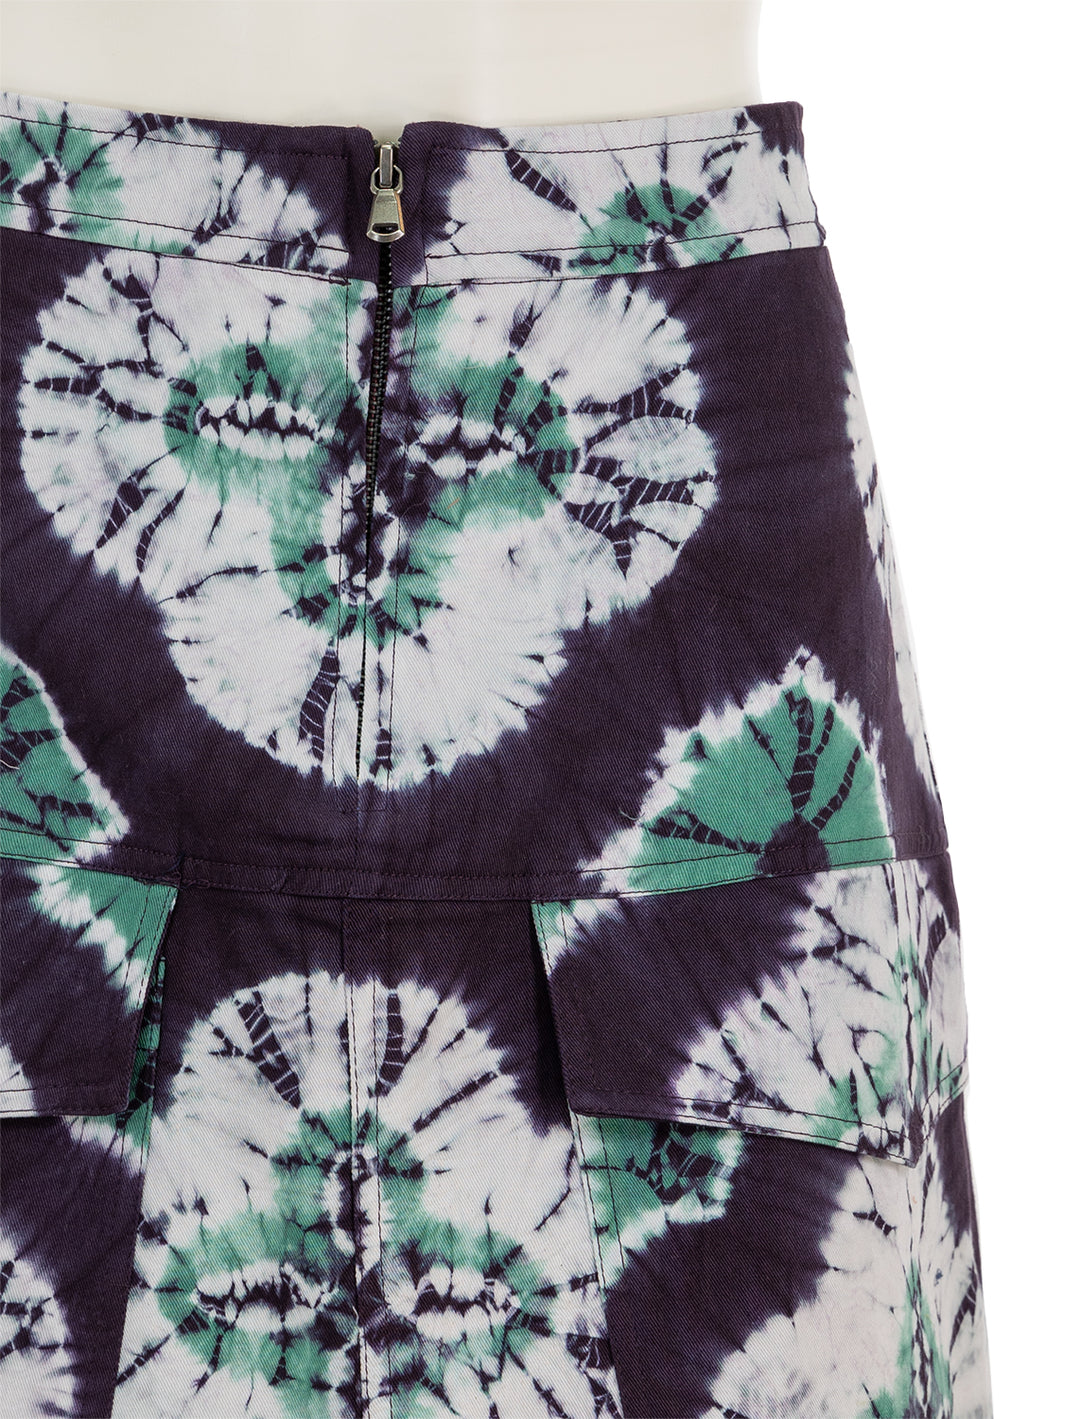 Close-up view of Sea NY's aveline tie dye print skirt in teal.